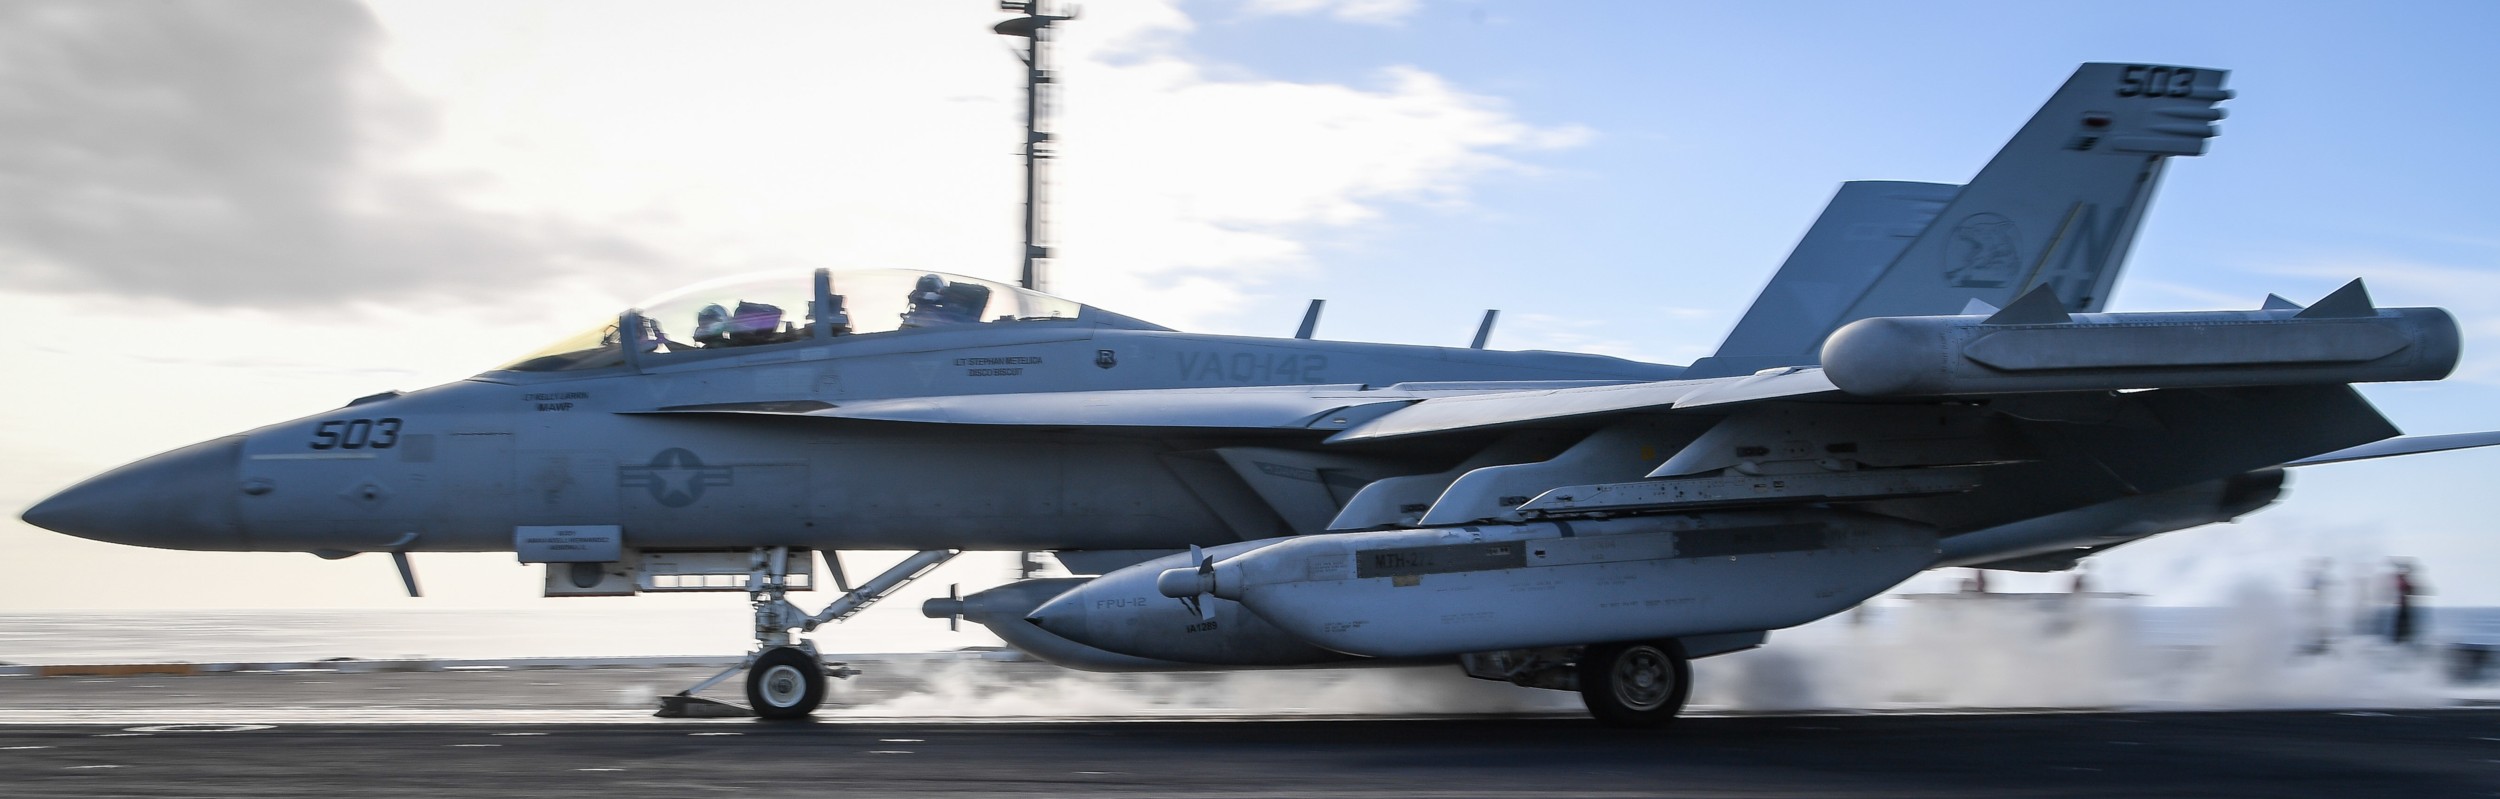 vaq-142 gray wolves electronic attack squadron ea-18g growler us navy cvw-11 uss theodore roosevelt cvn-71 105